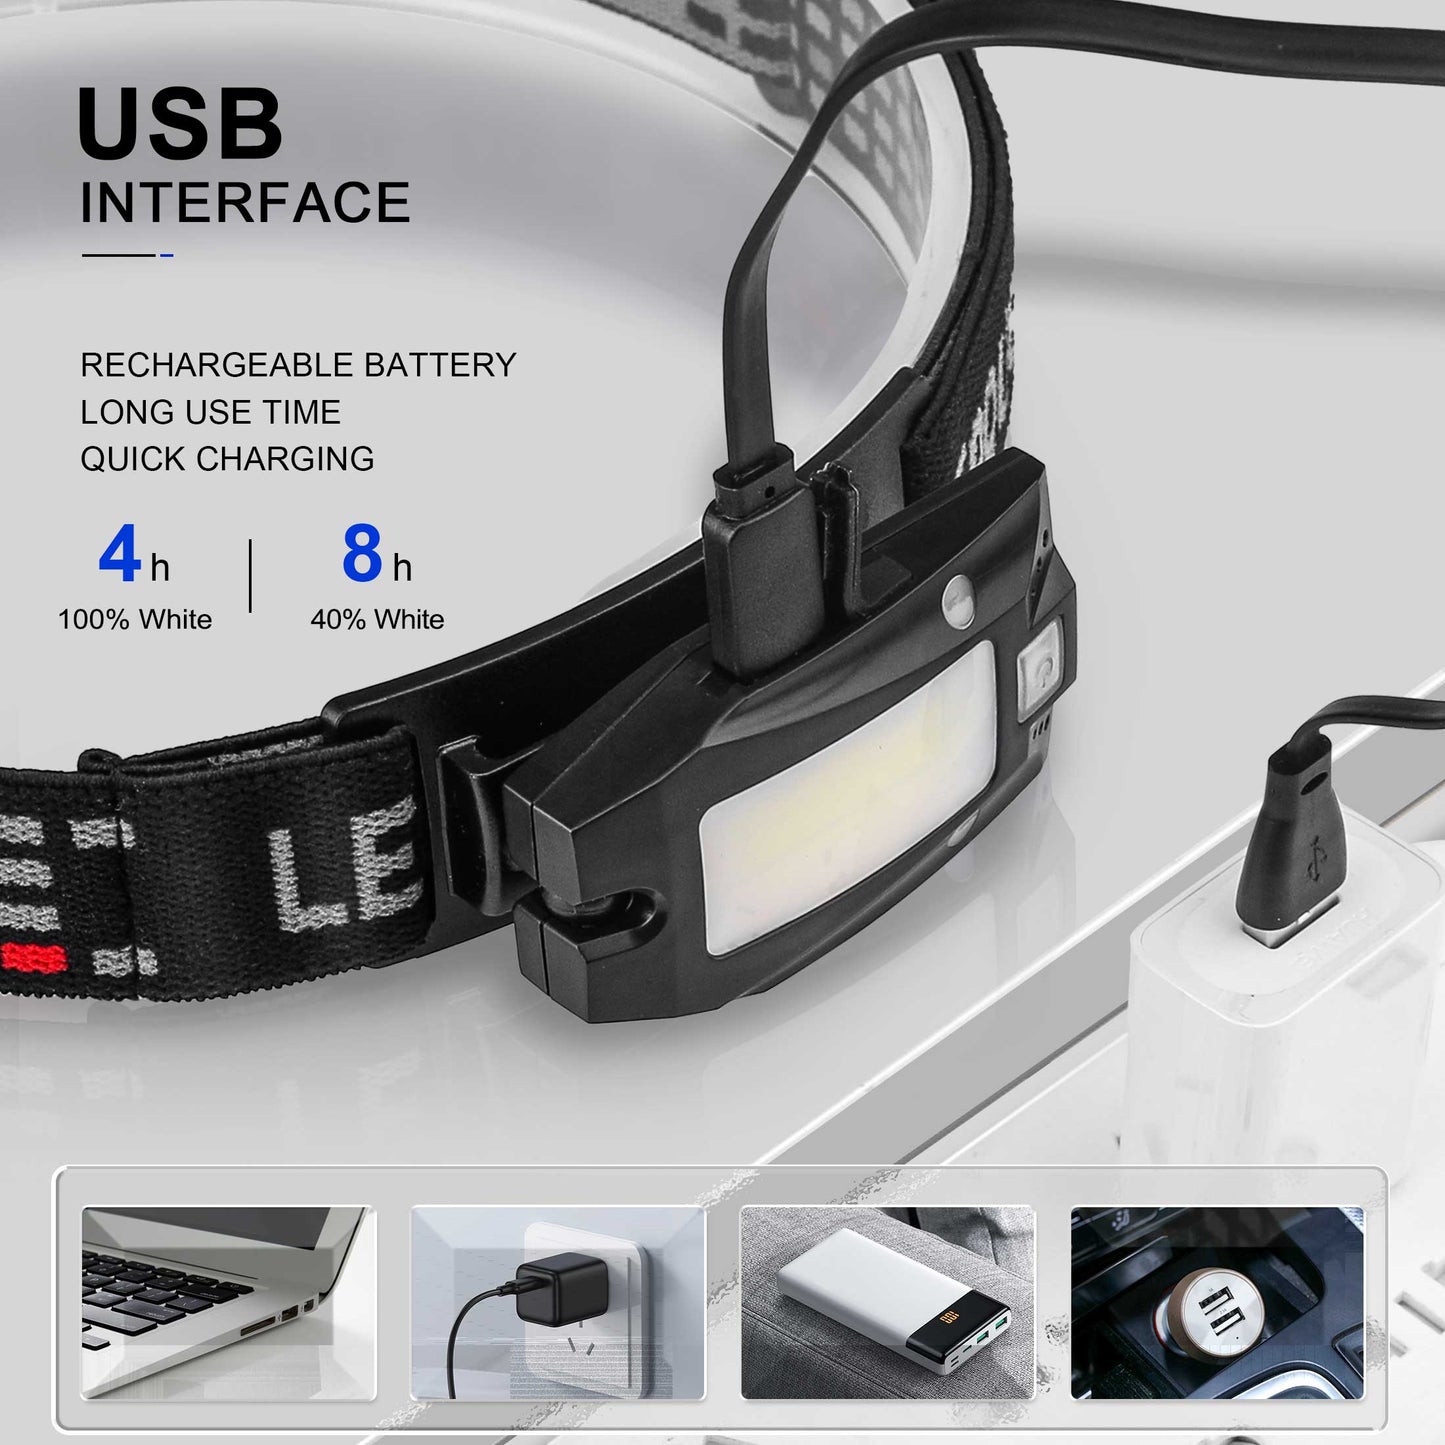 HAUTMEC Headlamp Rechargeable, LED USB Head Light Flashlight with 4 Modes, Waterproof Motion Sensor, 230° Wide Beam with Adjustable Headband for Running,Fishing,Hiking,Camping HT0218-HL